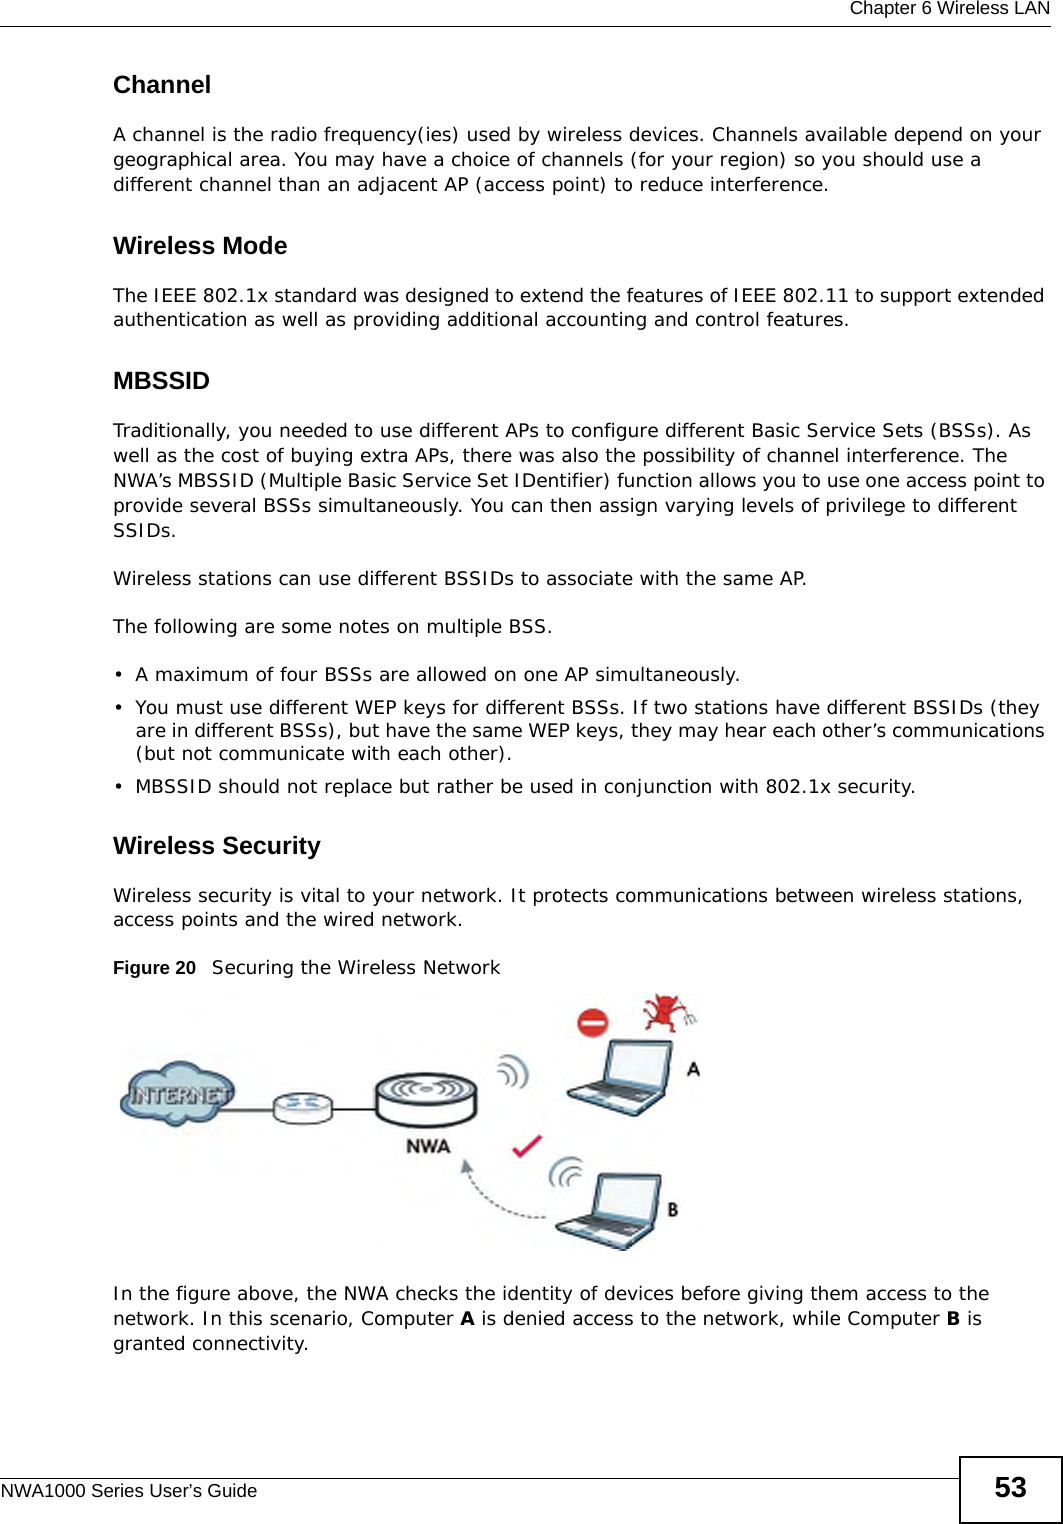  Chapter 6 Wireless LANNWA1000 Series User’s Guide 53ChannelA channel is the radio frequency(ies) used by wireless devices. Channels available depend on your geographical area. You may have a choice of channels (for your region) so you should use a different channel than an adjacent AP (access point) to reduce interference.Wireless ModeThe IEEE 802.1x standard was designed to extend the features of IEEE 802.11 to support extended authentication as well as providing additional accounting and control features. MBSSIDTraditionally, you needed to use different APs to configure different Basic Service Sets (BSSs). As well as the cost of buying extra APs, there was also the possibility of channel interference. The NWA’s MBSSID (Multiple Basic Service Set IDentifier) function allows you to use one access point to provide several BSSs simultaneously. You can then assign varying levels of privilege to different SSIDs.Wireless stations can use different BSSIDs to associate with the same AP. The following are some notes on multiple BSS. • A maximum of four BSSs are allowed on one AP simultaneously.• You must use different WEP keys for different BSSs. If two stations have different BSSIDs (they are in different BSSs), but have the same WEP keys, they may hear each other’s communications (but not communicate with each other).• MBSSID should not replace but rather be used in conjunction with 802.1x security.Wireless SecurityWireless security is vital to your network. It protects communications between wireless stations, access points and the wired network. Figure 20   Securing the Wireless NetworkIn the figure above, the NWA checks the identity of devices before giving them access to the network. In this scenario, Computer A is denied access to the network, while Computer B is granted connectivity.